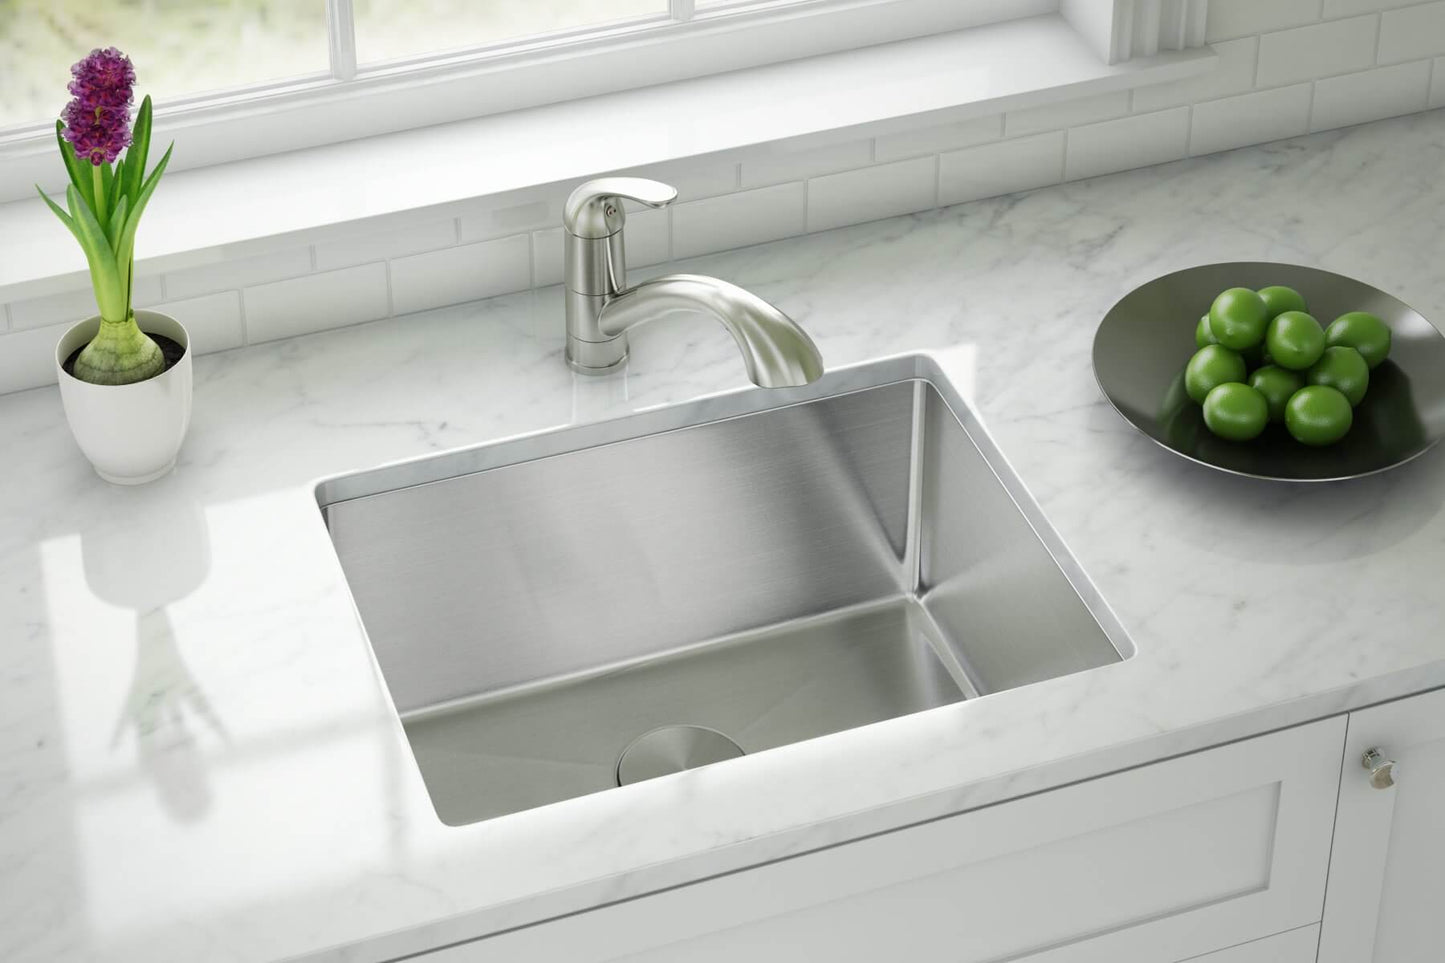 A-700-C Single Handle Pull-Out Kitchen Faucet